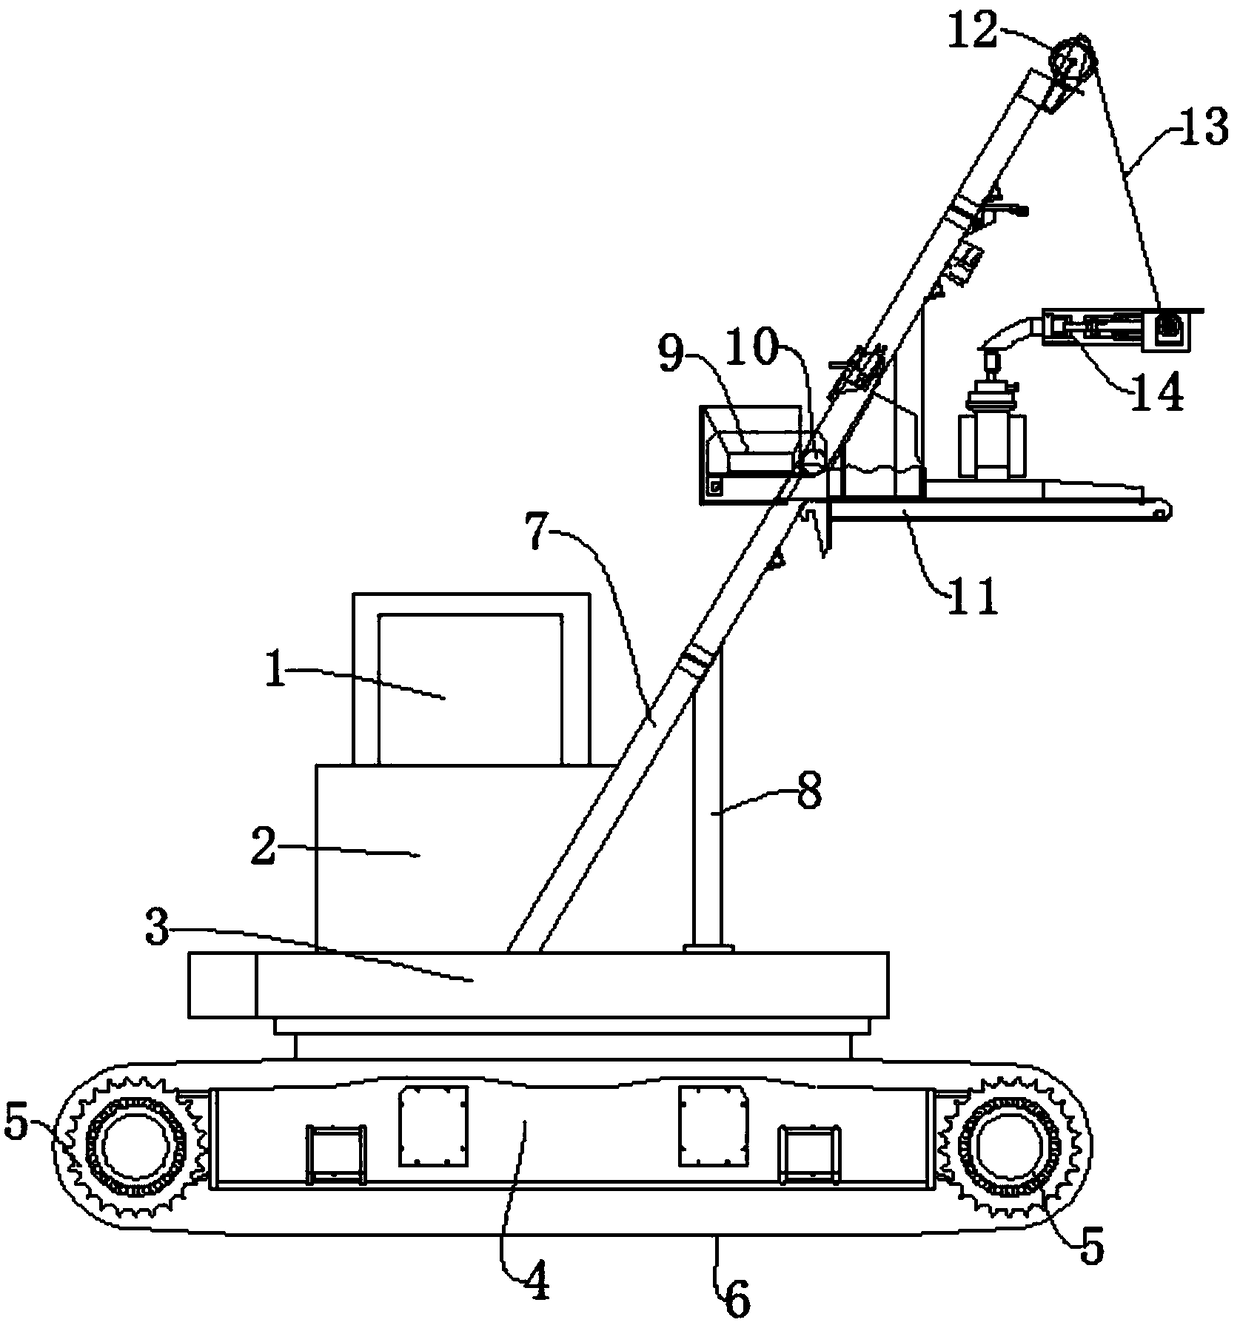 A film and television animation trajectory shooting device